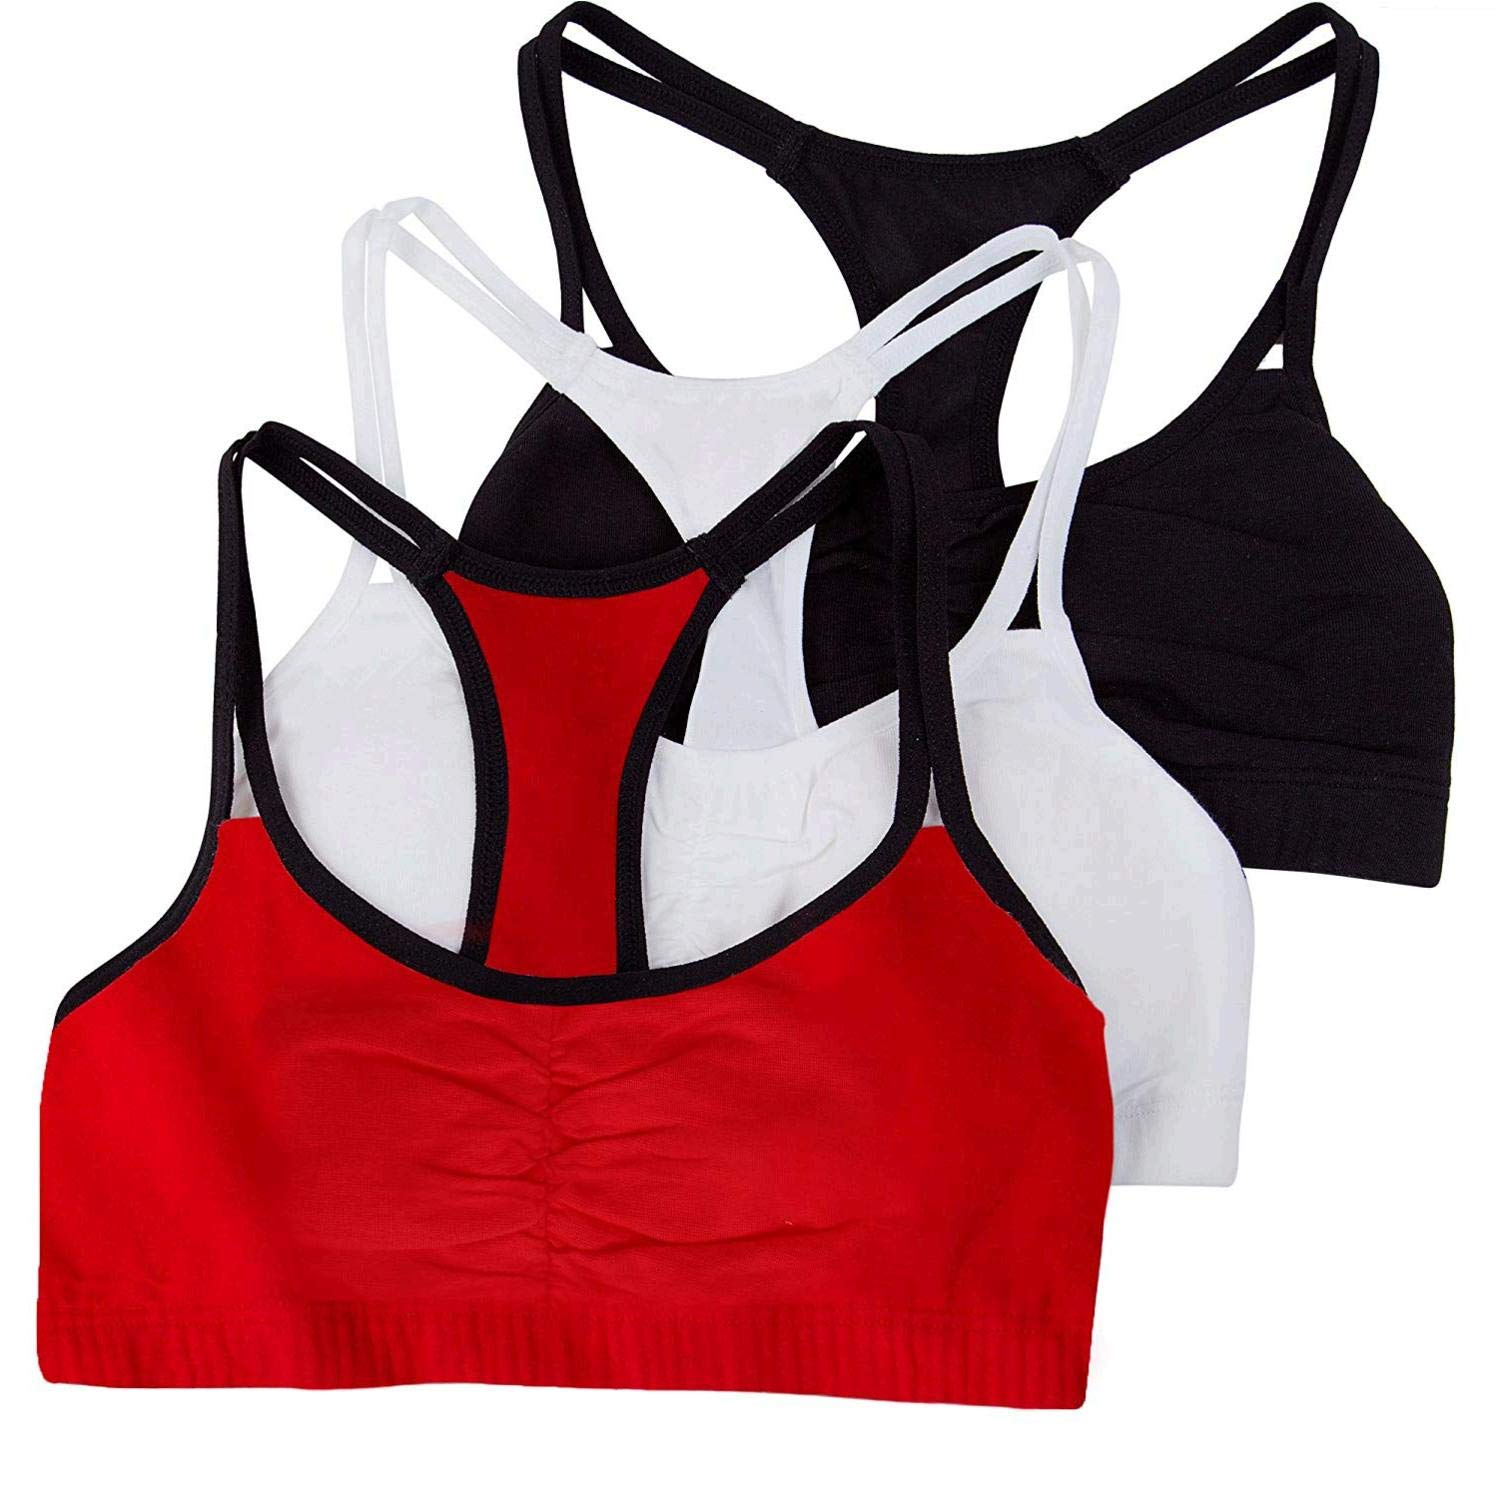 3-Pack Fruit of the Loom Women's Spaghetti Strap Cotton Sports Bra (Red w/ Black/White/Black) $8.46 ($2.82 Each) + F/S w/ Prime or on $25+